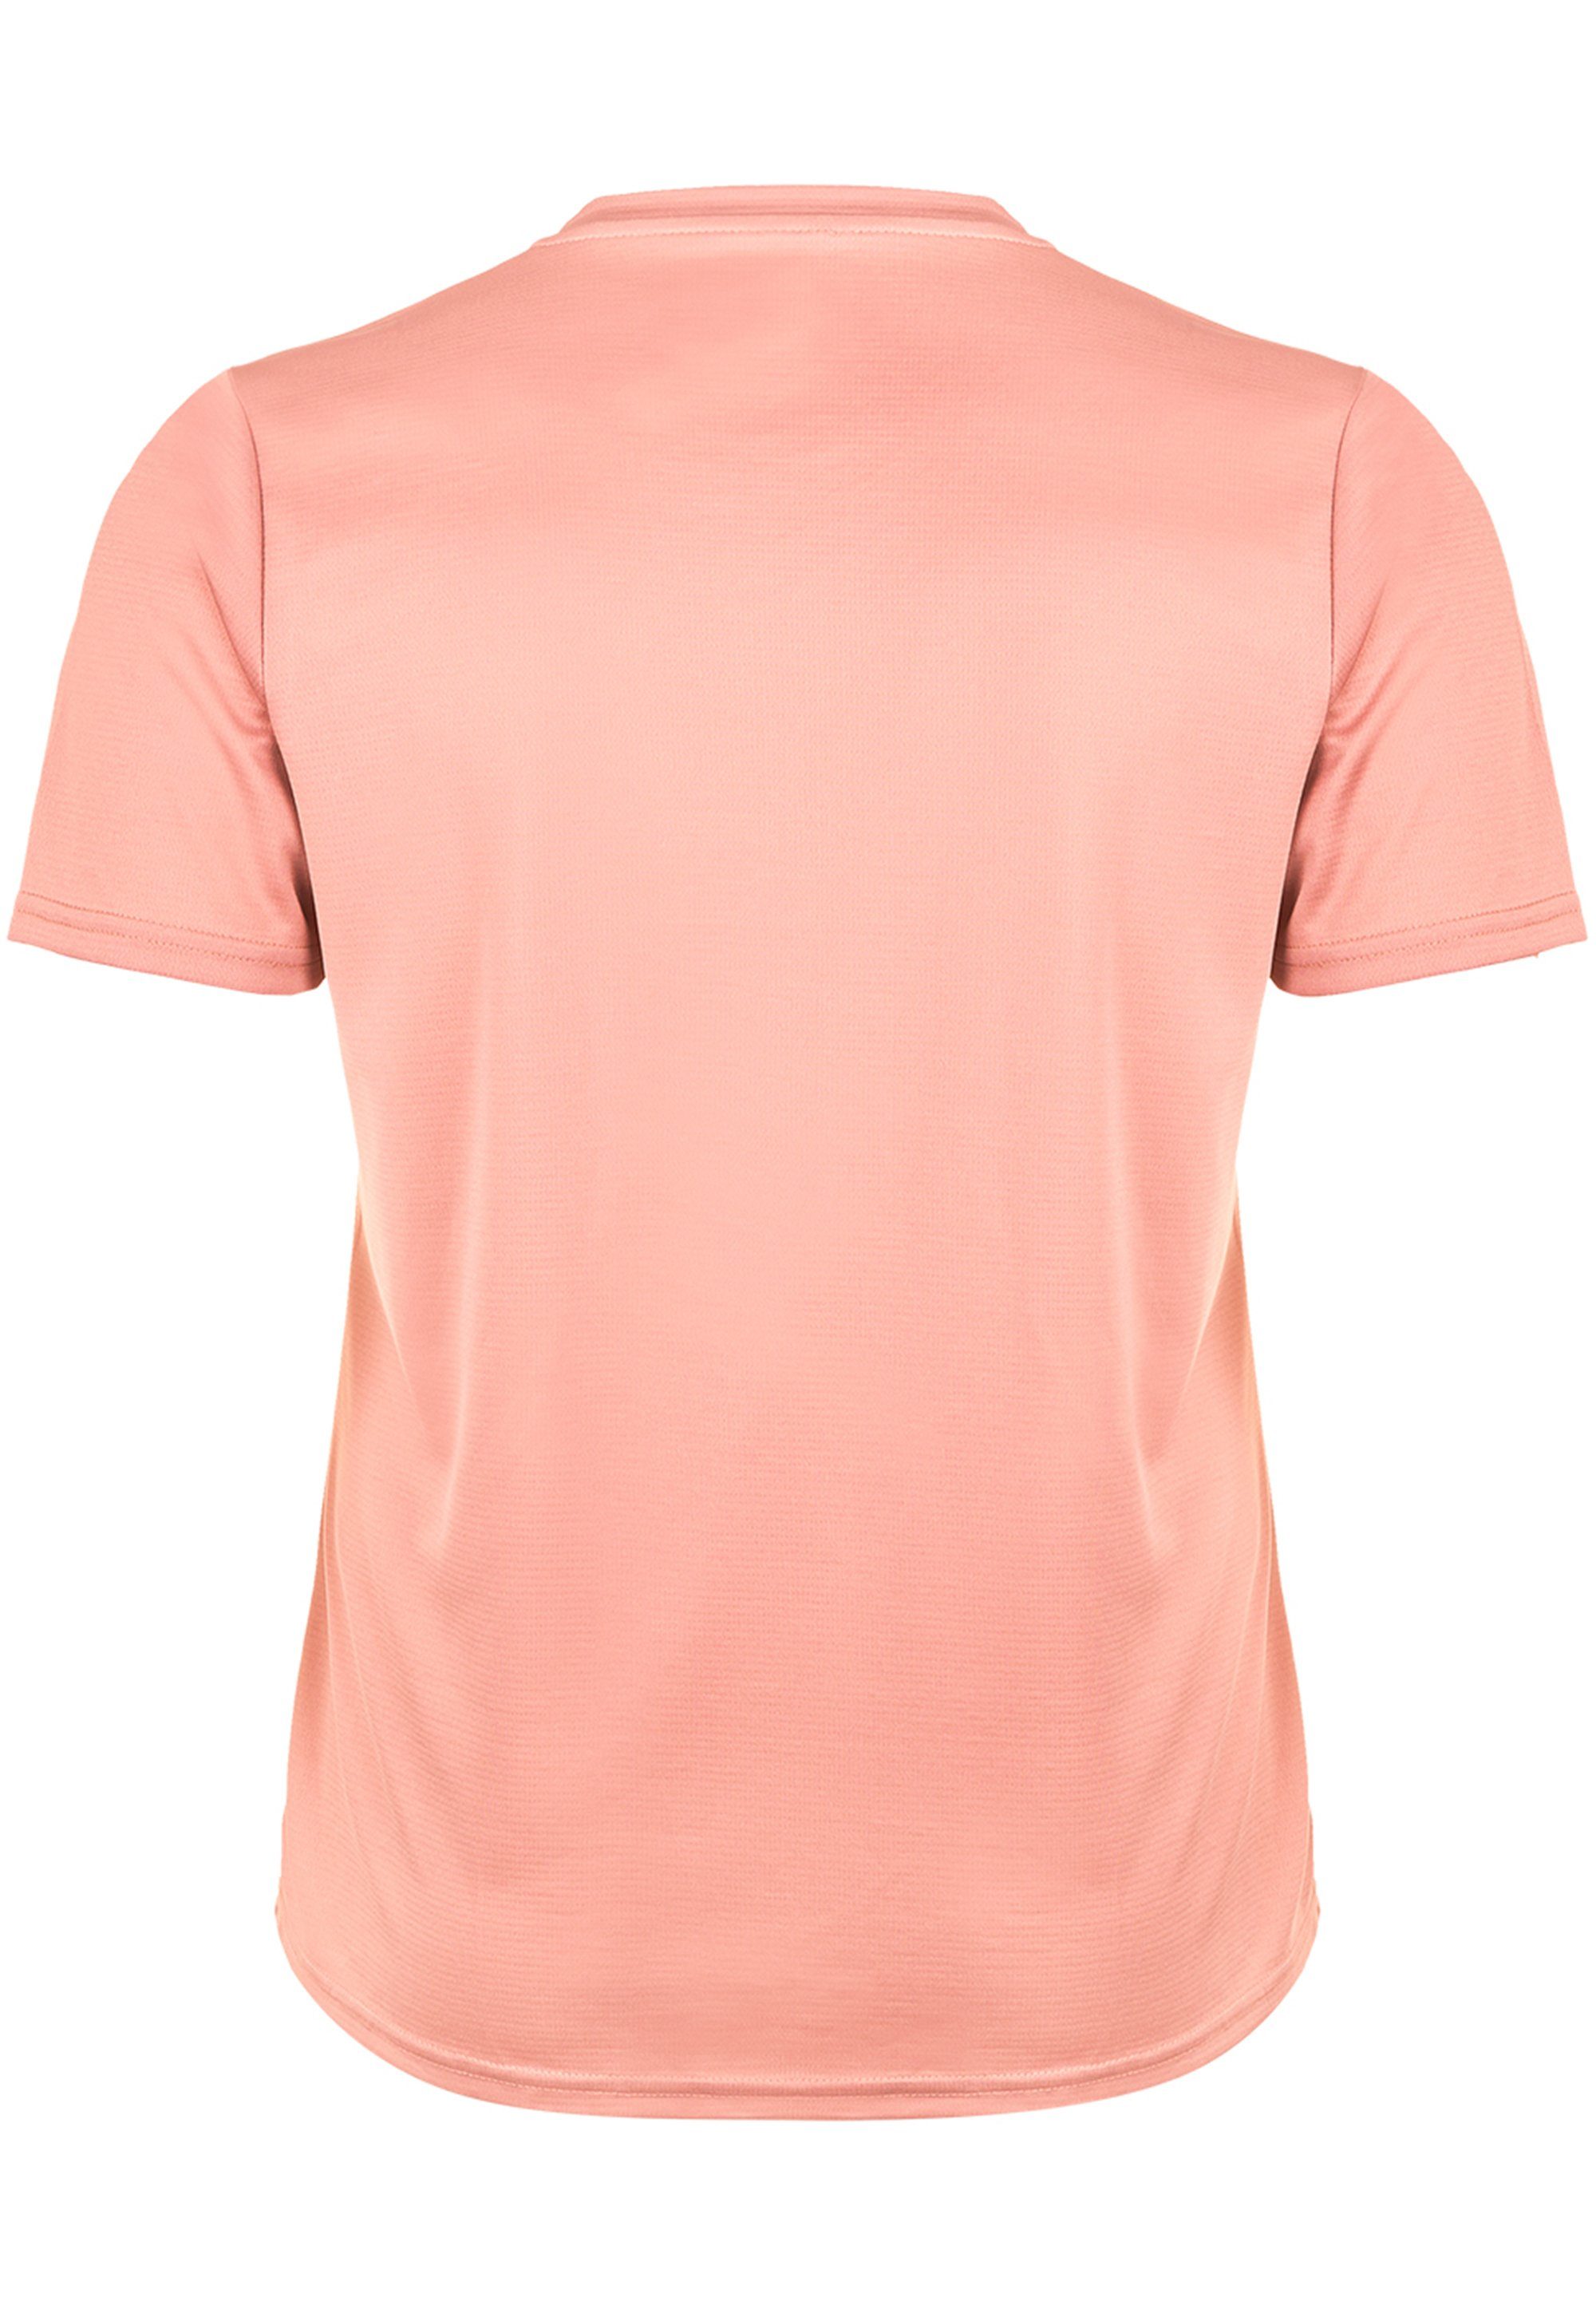 (1-tlg) ANNABELLE Q by Endurance Funktionsshirt QUICK mit rosa-pastell DRY-Technologie